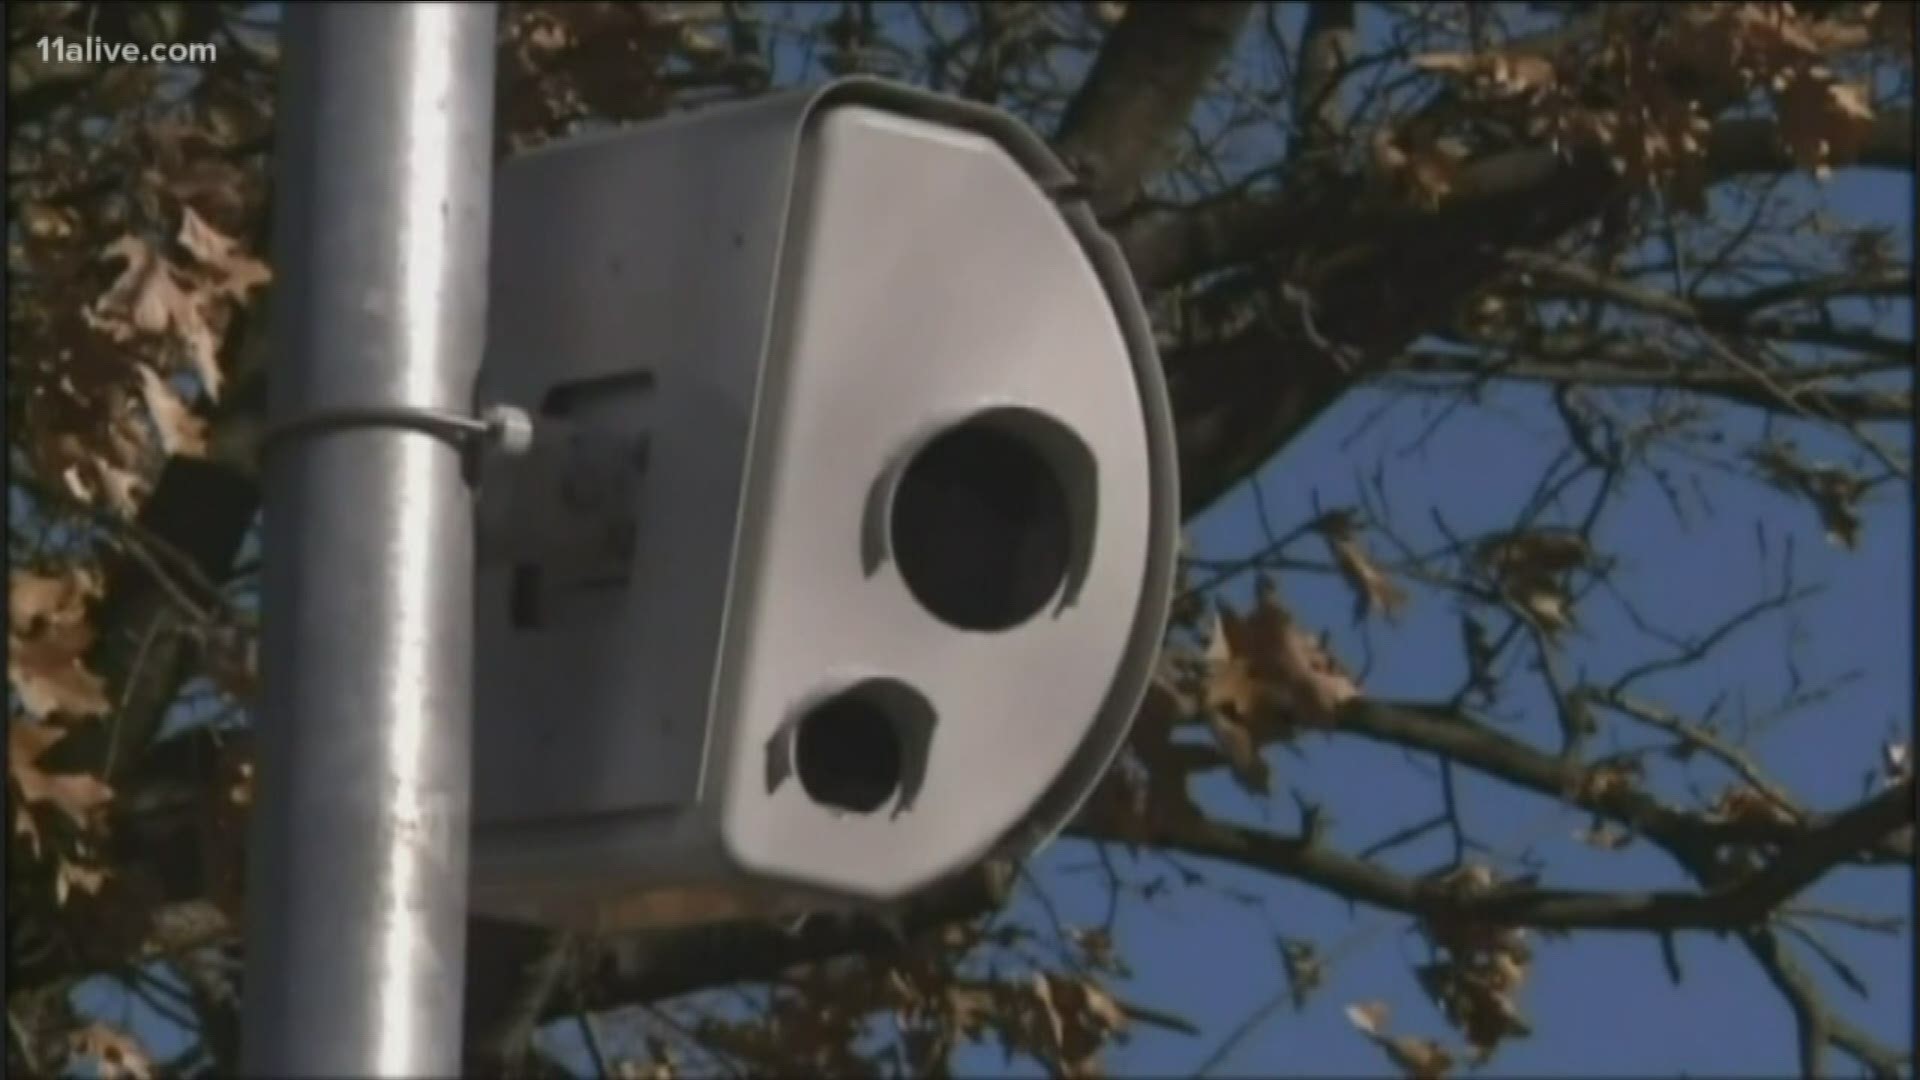 Police will put up speed cameras in the five school zones after they found 3,000 people speeding around schools.